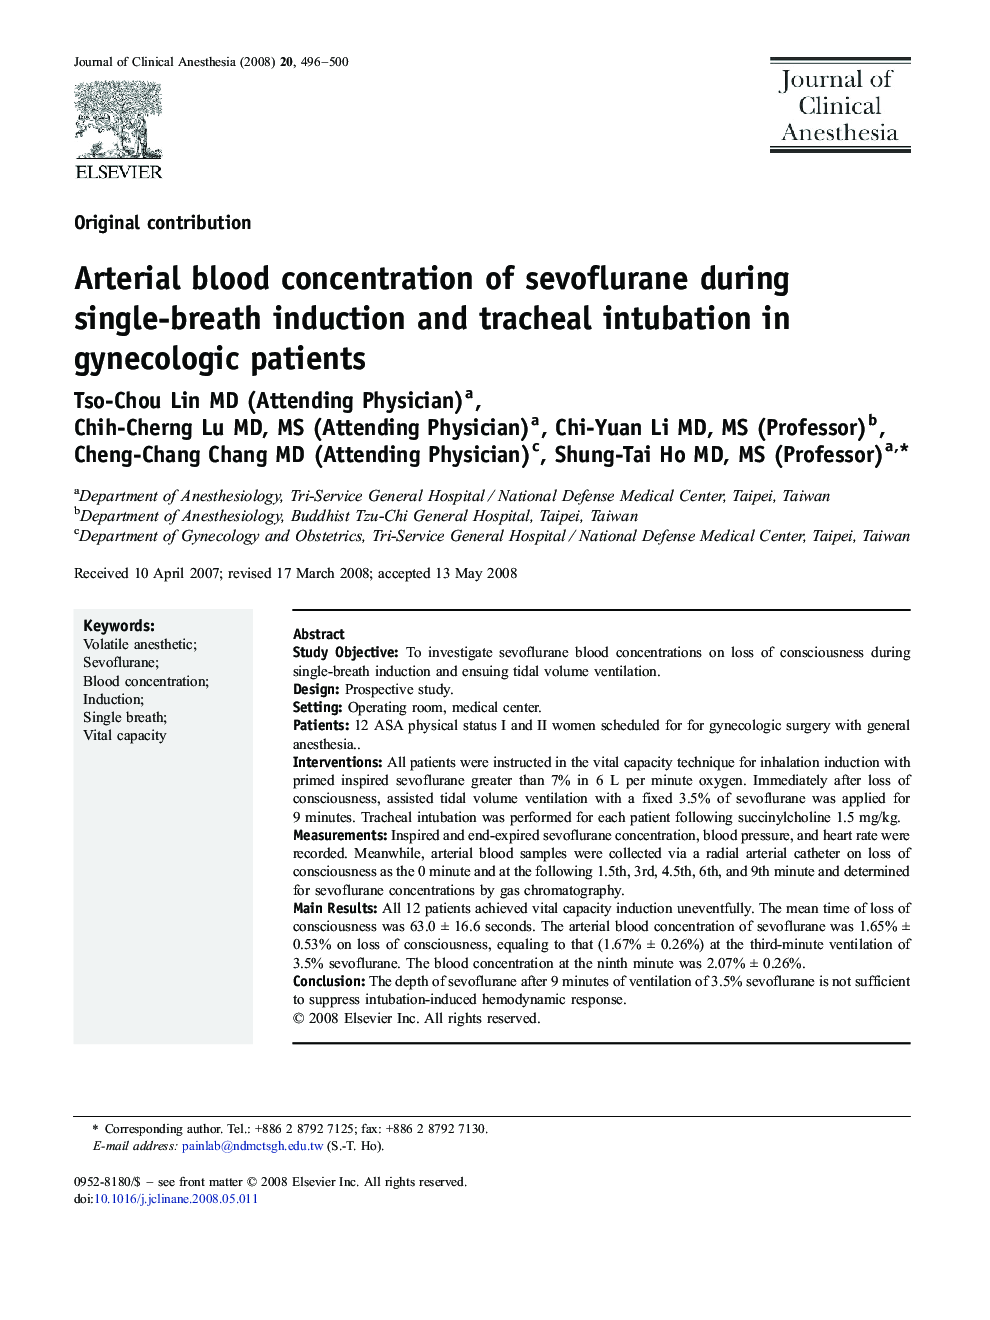 Arterial blood concentration of sevoflurane during single-breath induction and tracheal intubation in gynecologic patients